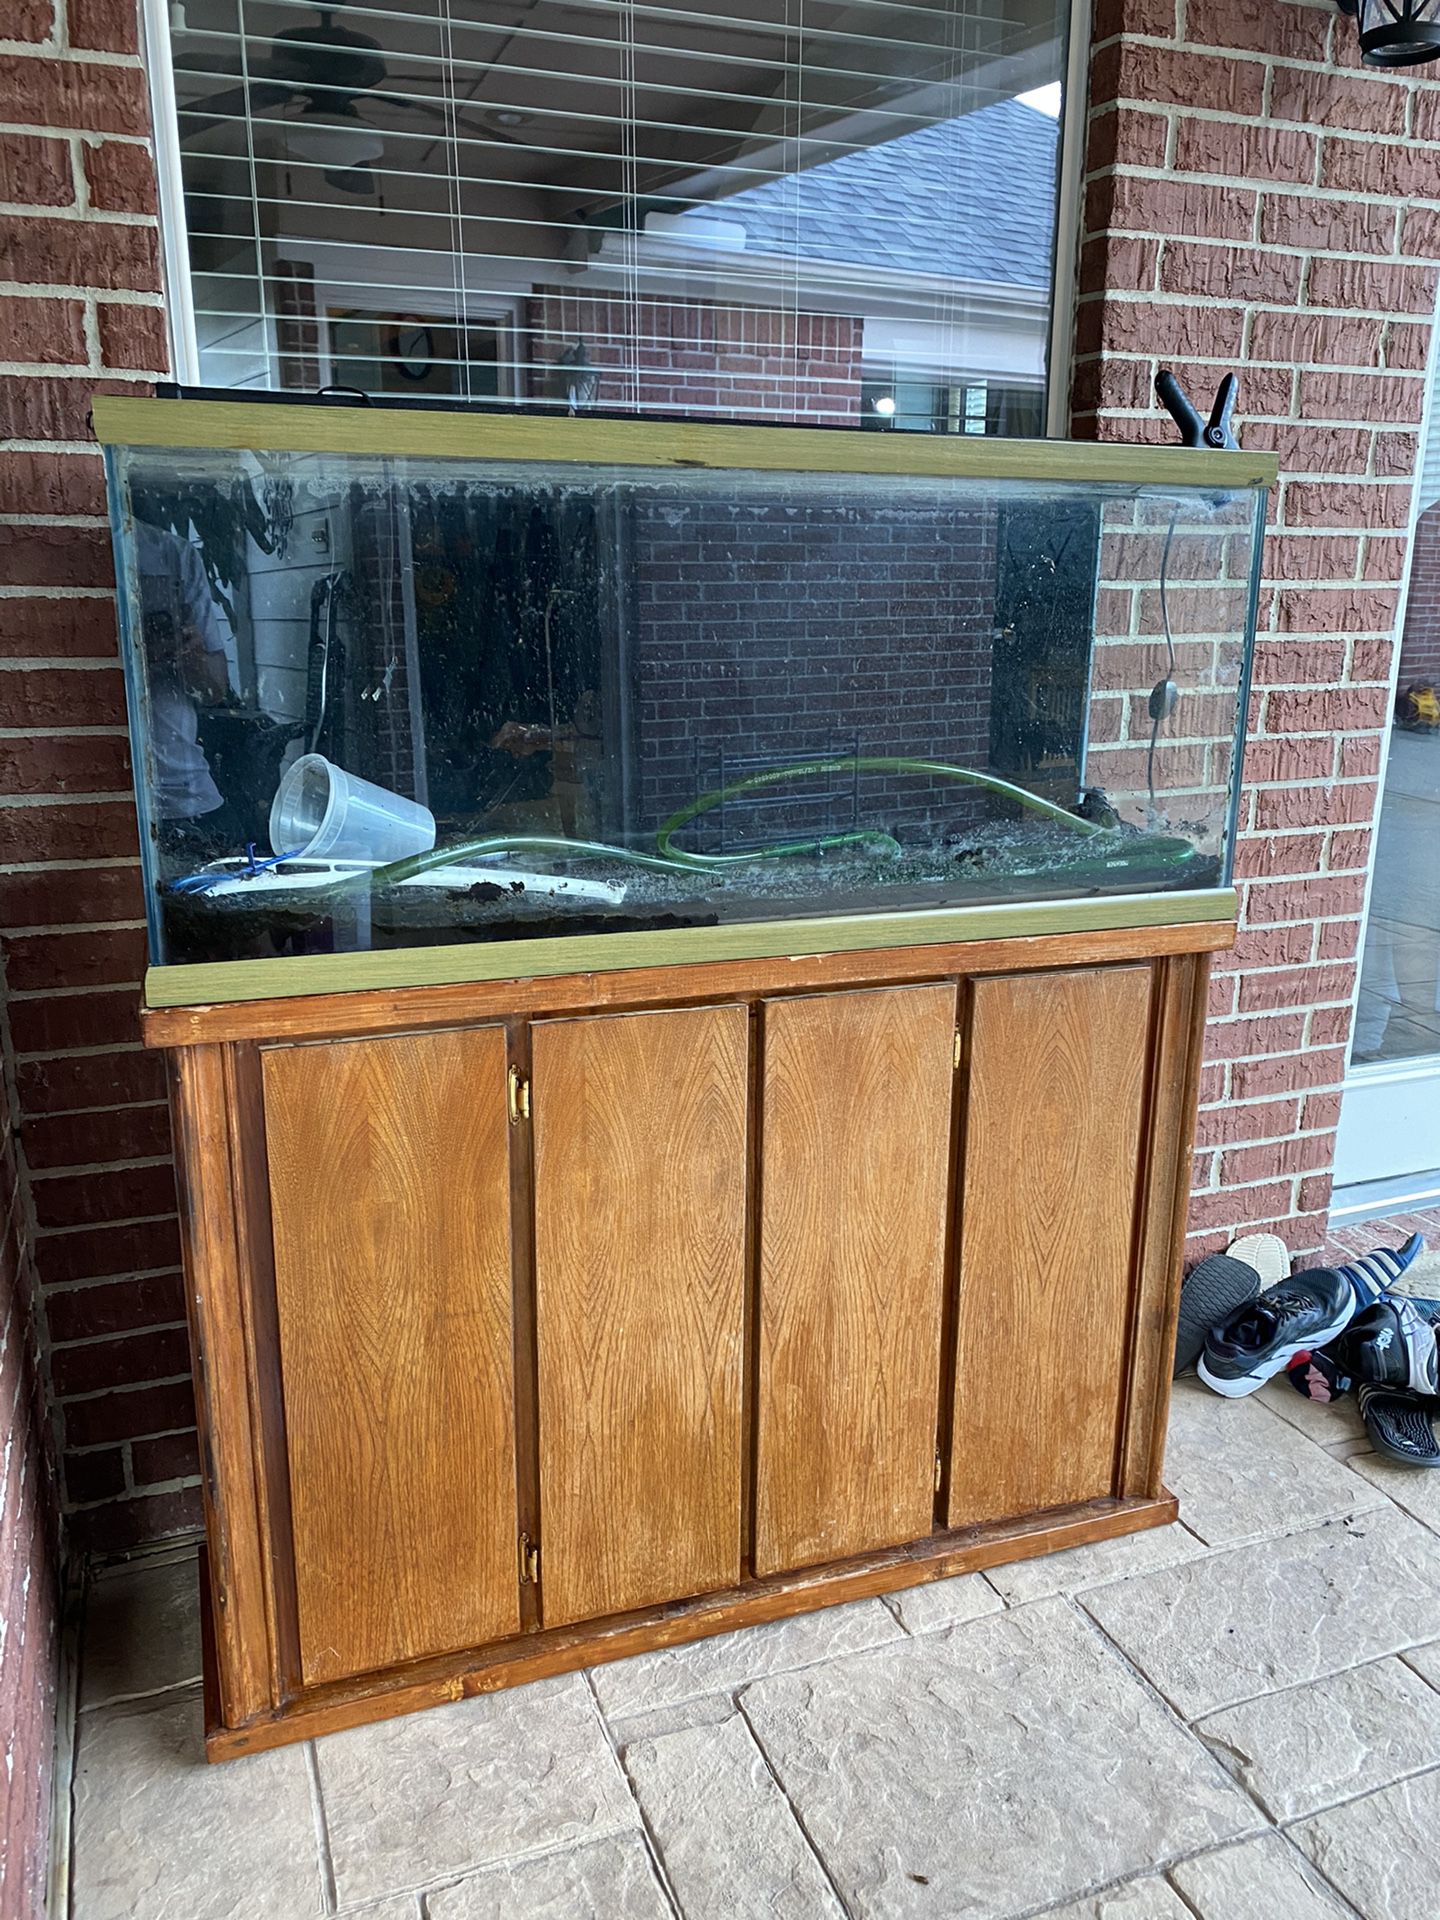 55 gallons fish tank can aquarium with wood stand, eheim 2217 filter